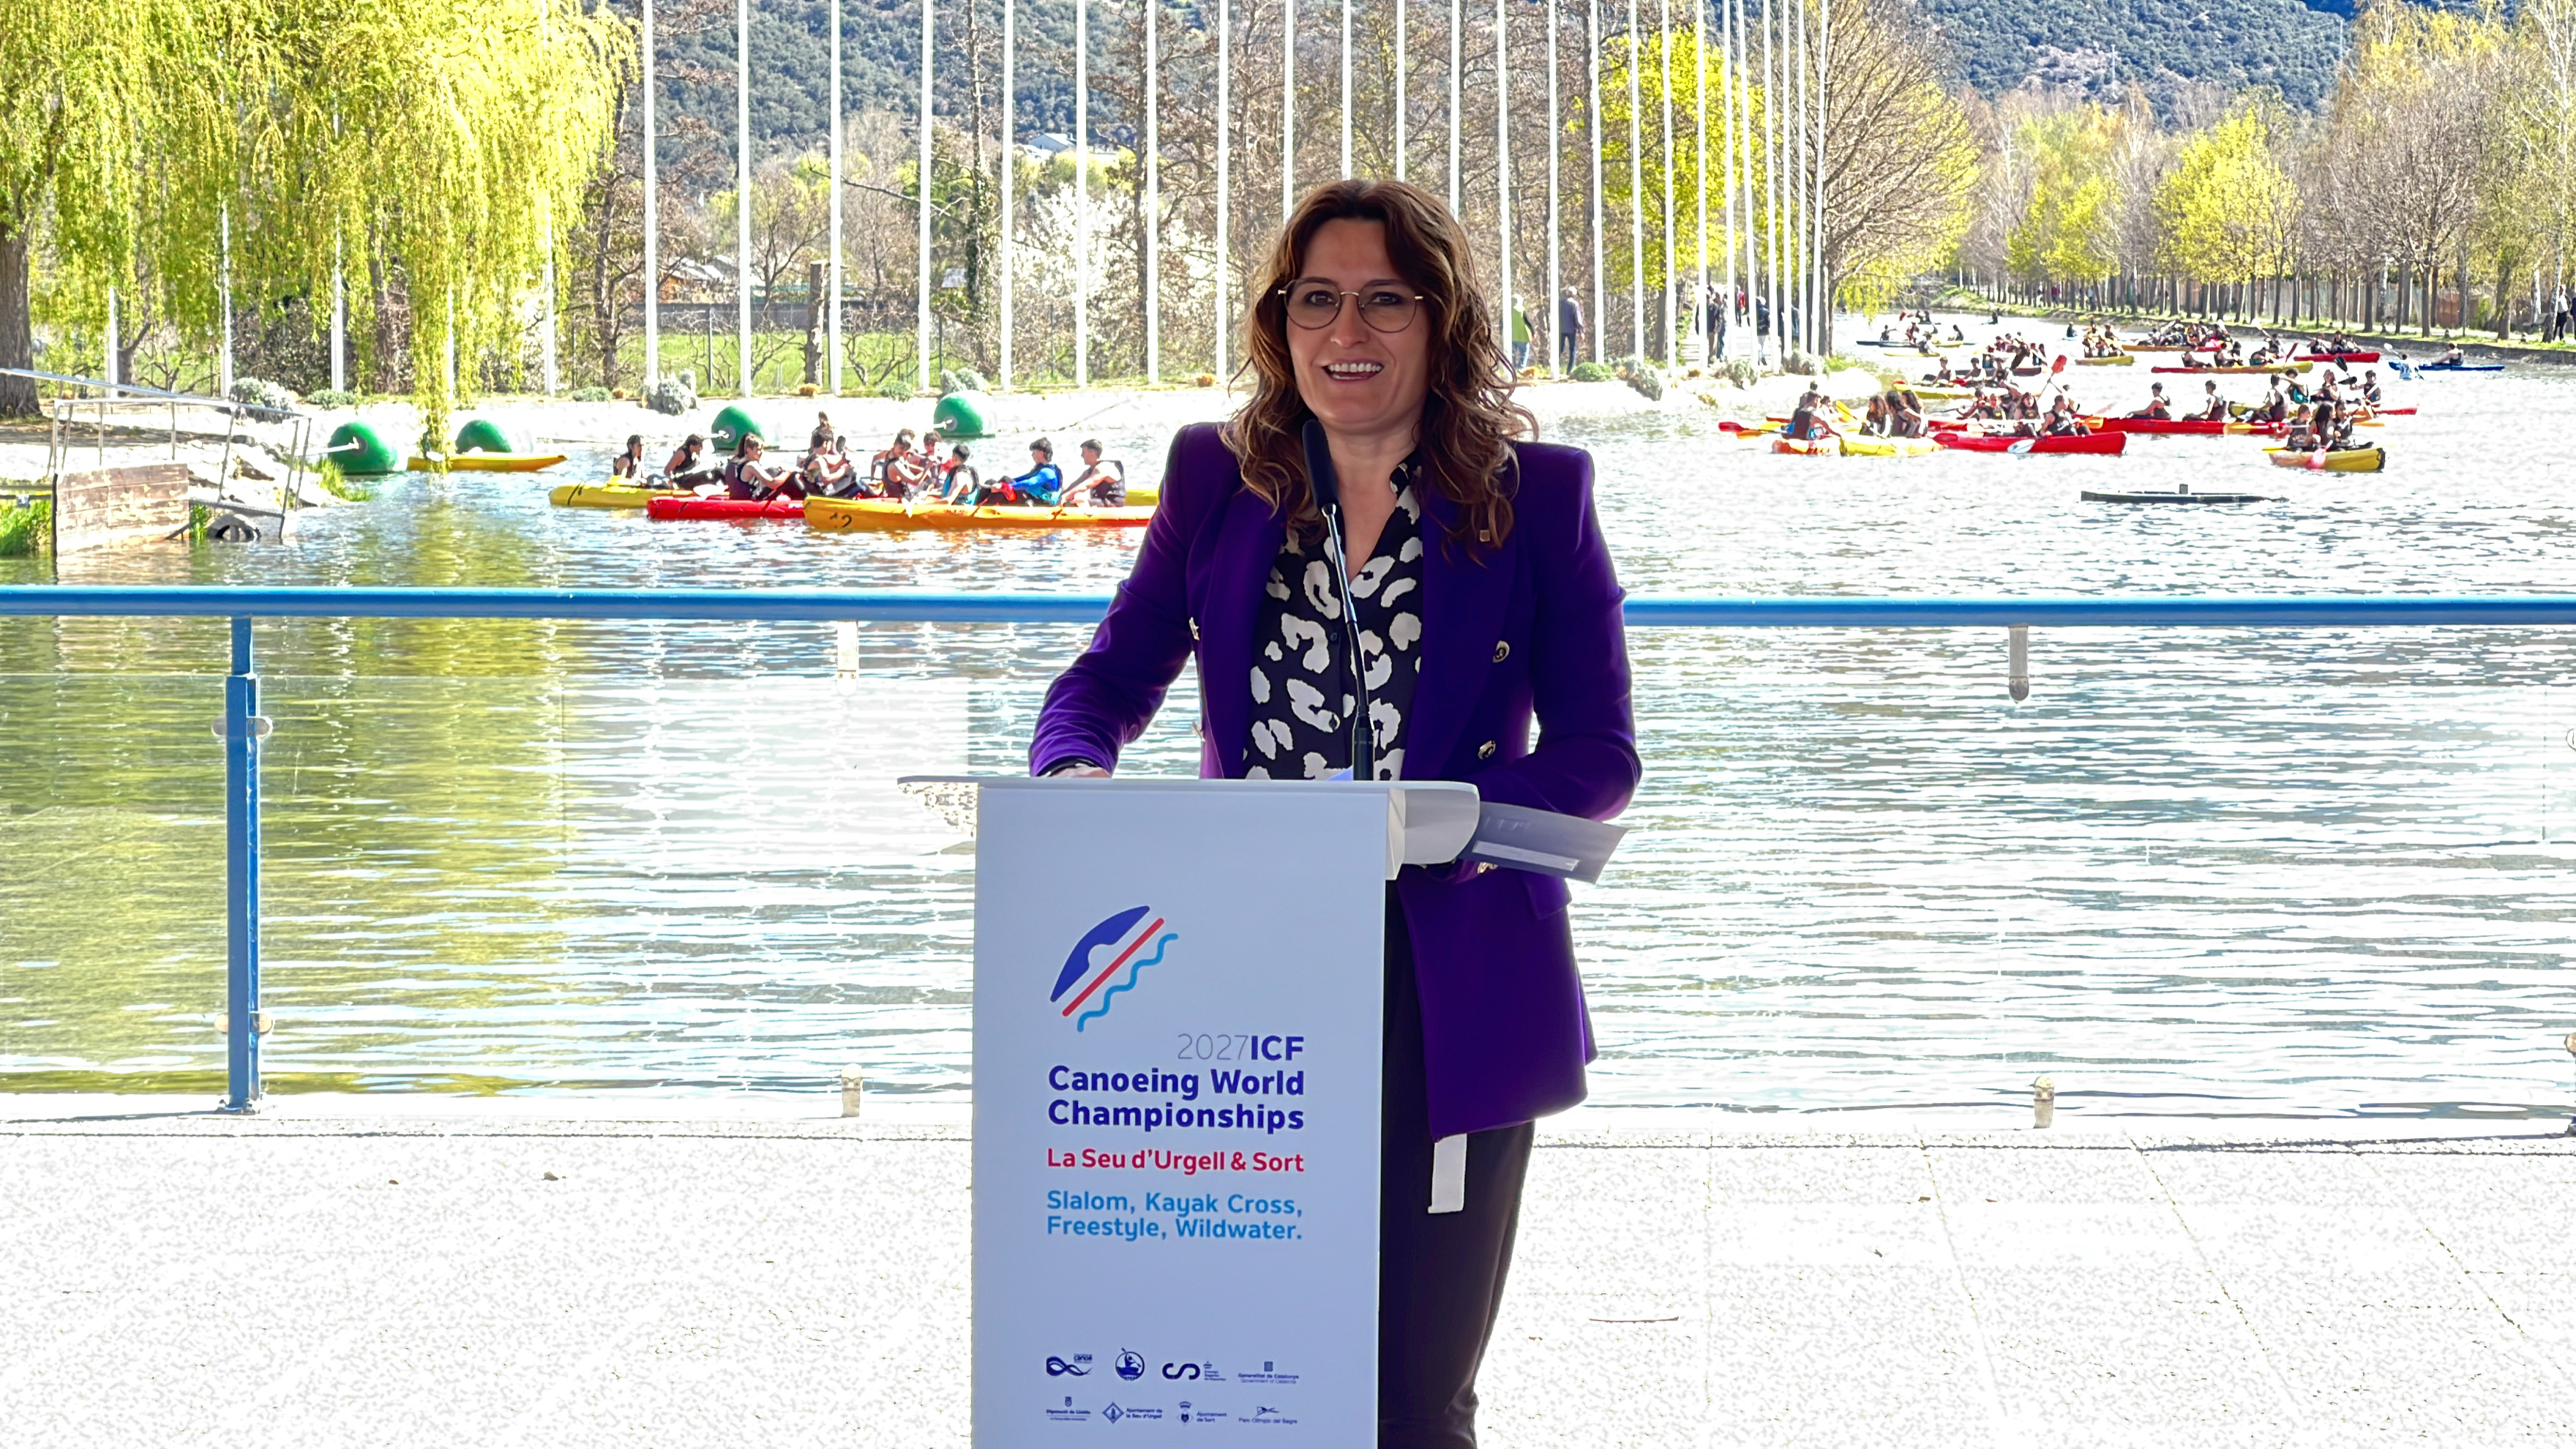 Presidency minister Laura Vilagrà during a press conference announcing the joint 2027 ICF Canoeing World Championships on April 3, 2023